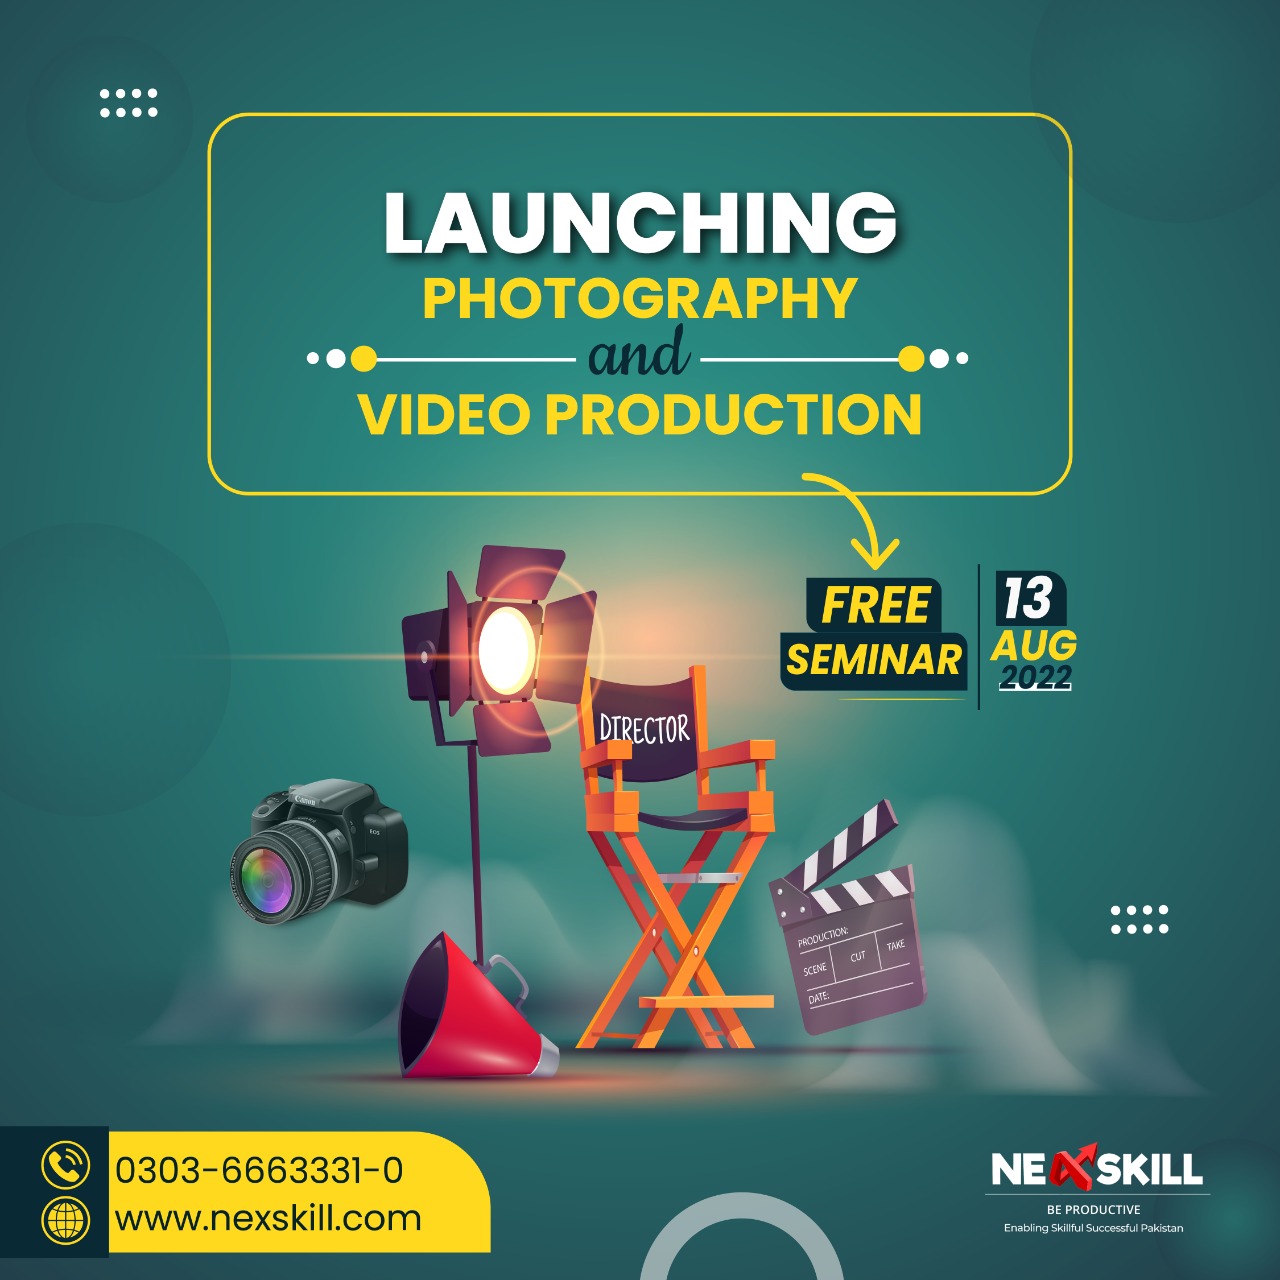 Launching Photography and Video Production